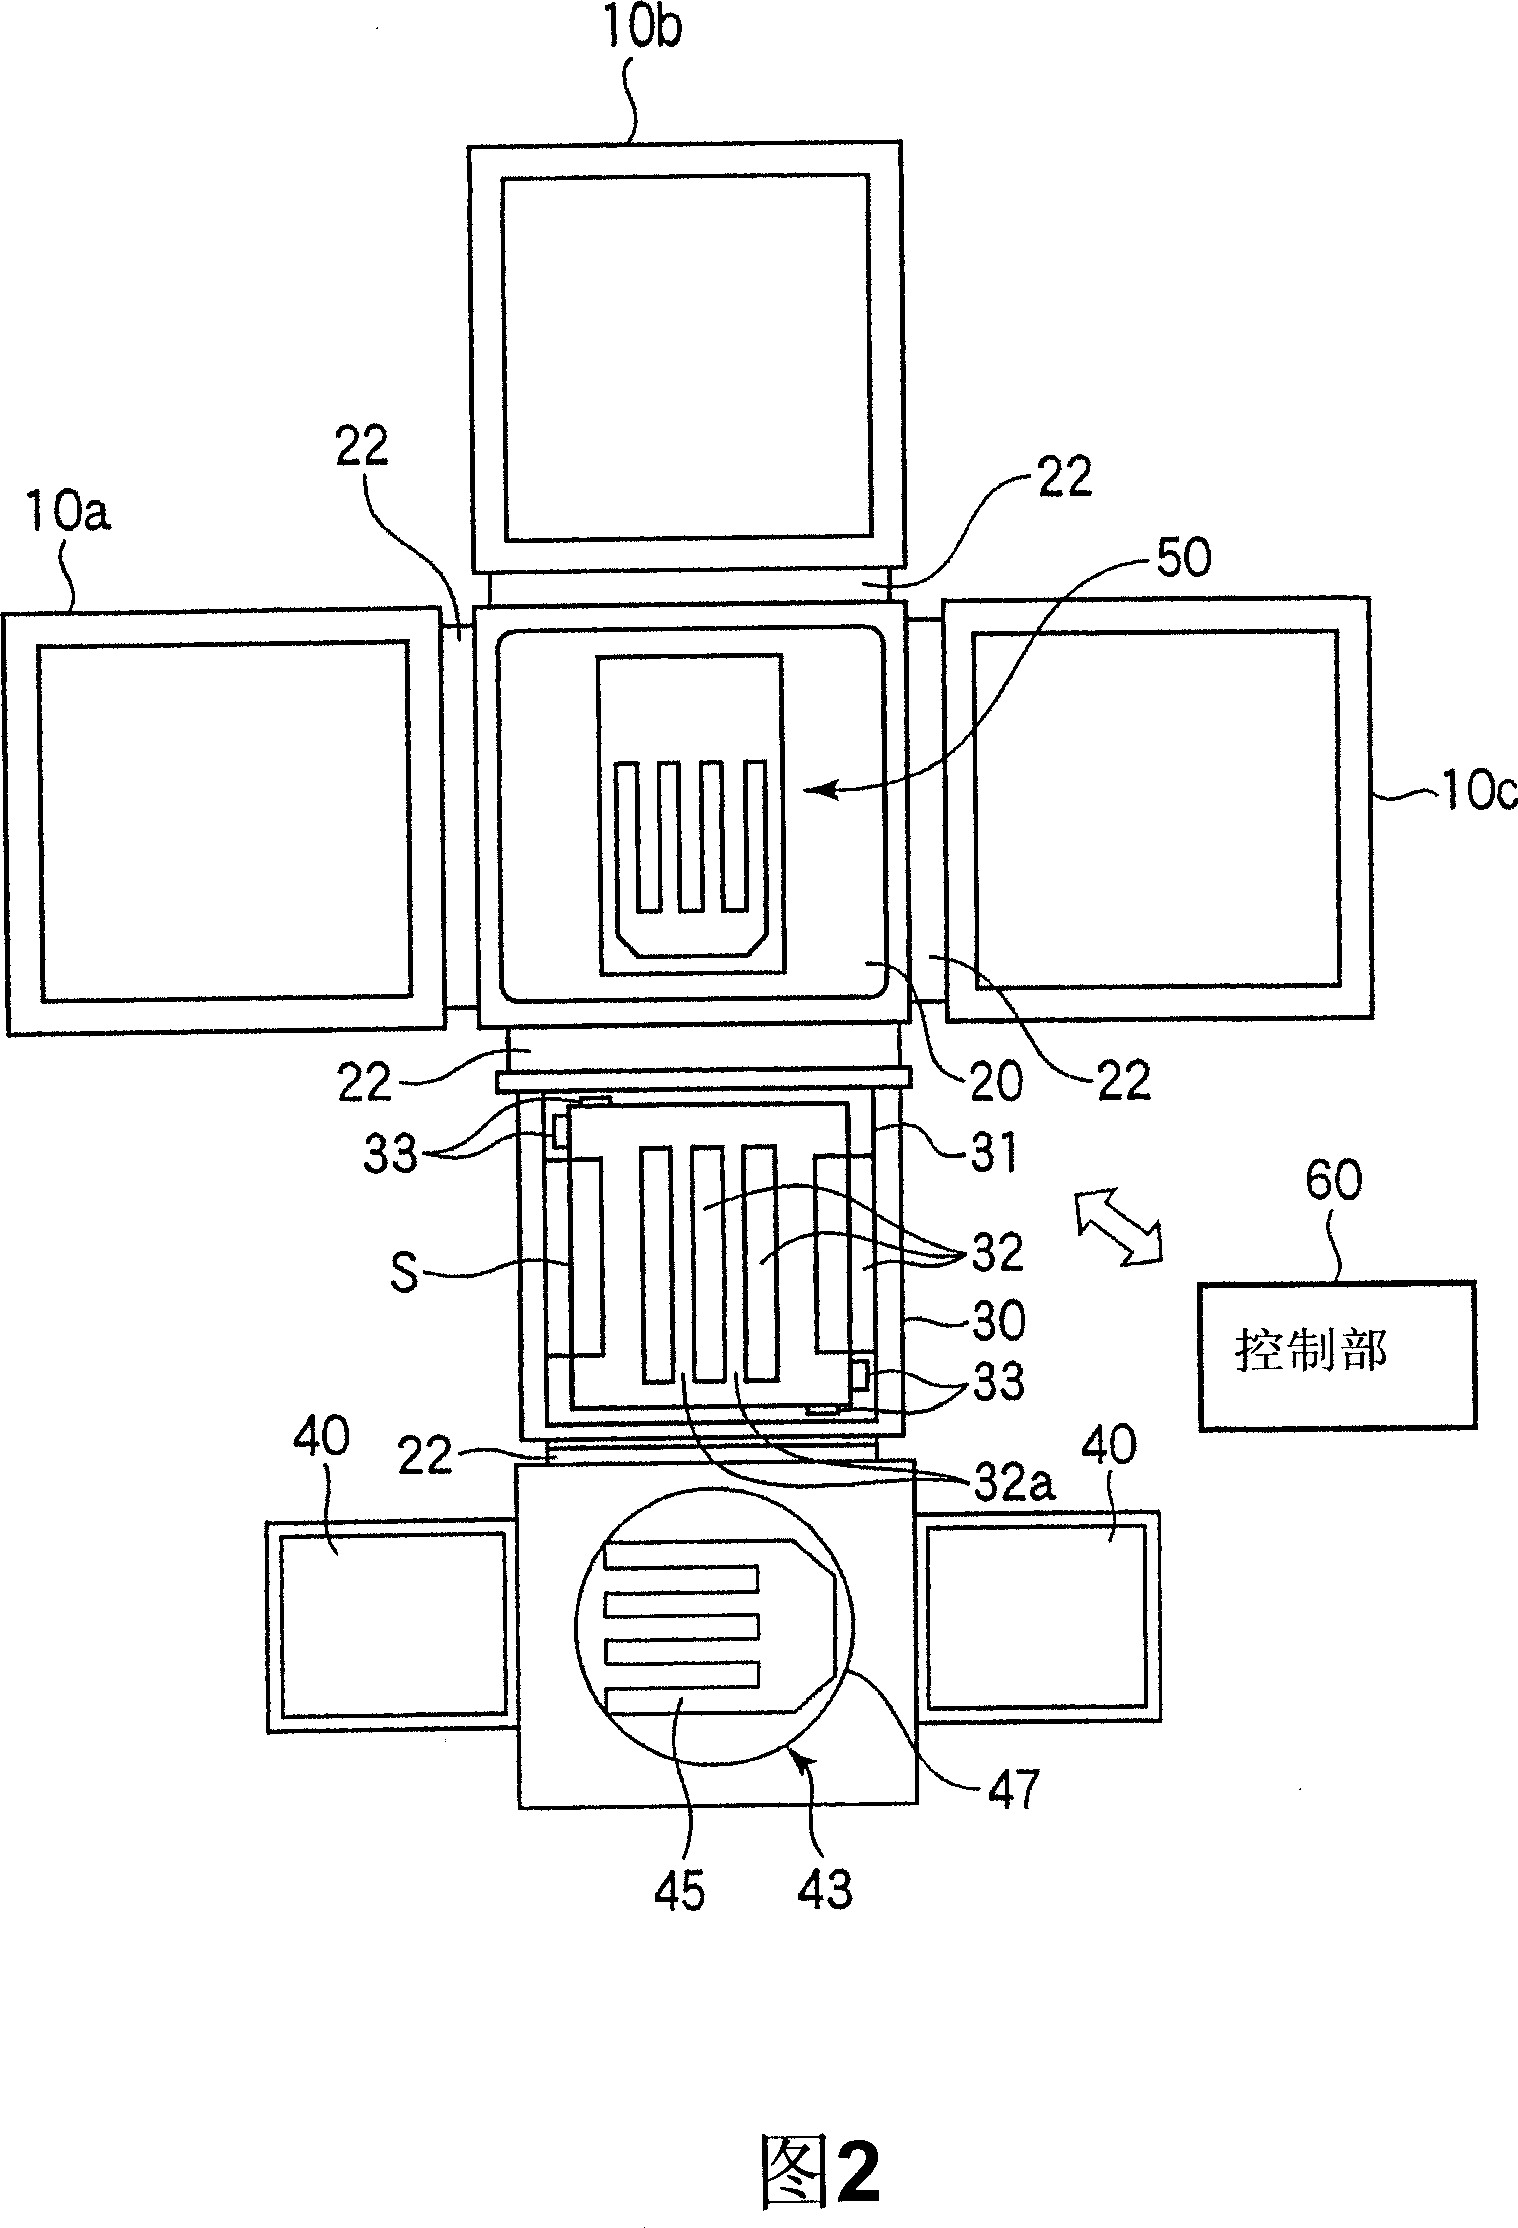 Conveying chamber, substrate processing device, and substrate disorder detection method